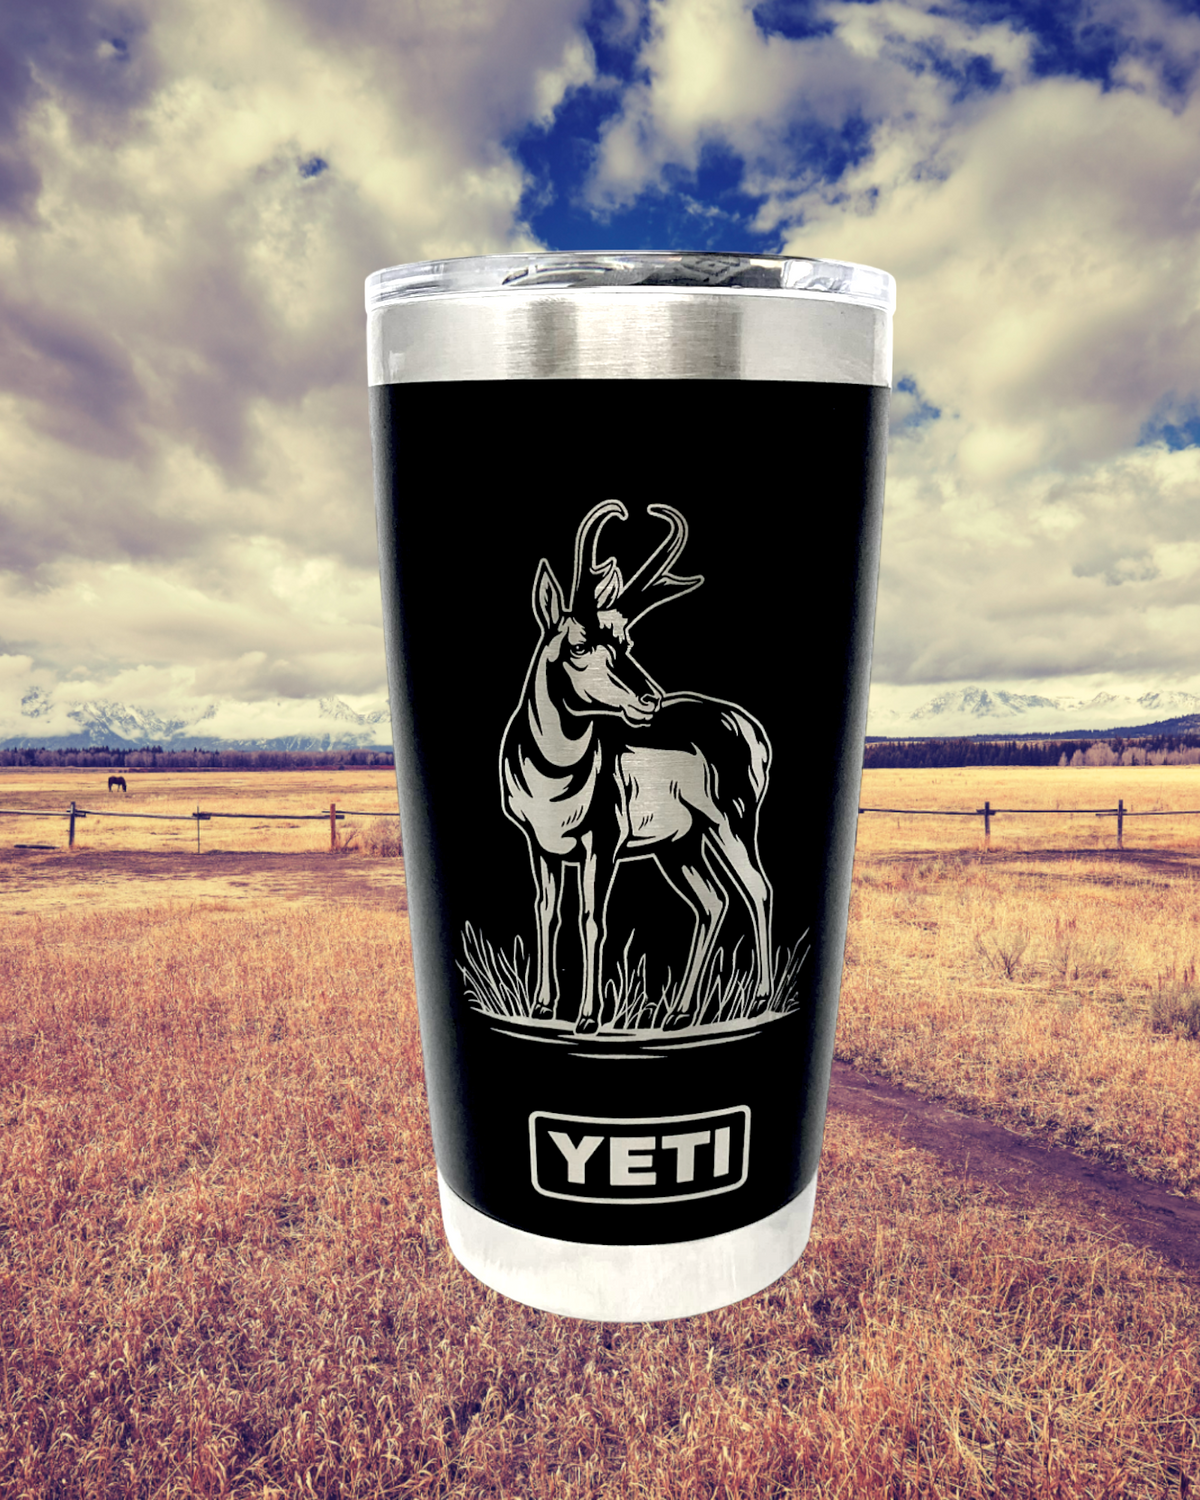 The Pronghorn Antelope Yeti Tumbler gives hunters the ideal outdoor companion.